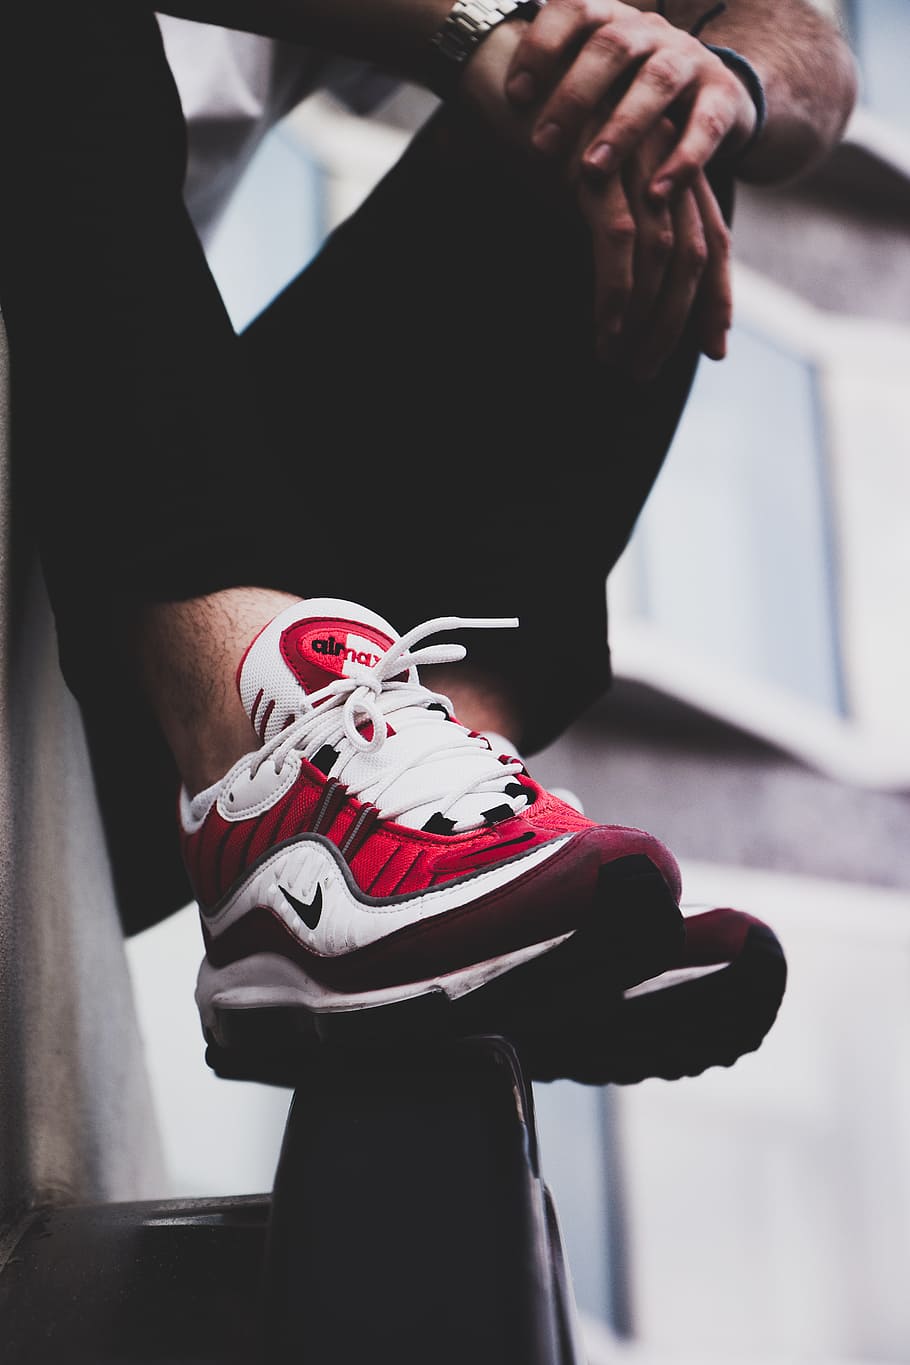 wallpaper: red-and-white Max shoes\, street, streetwear | Wallpaper Flare